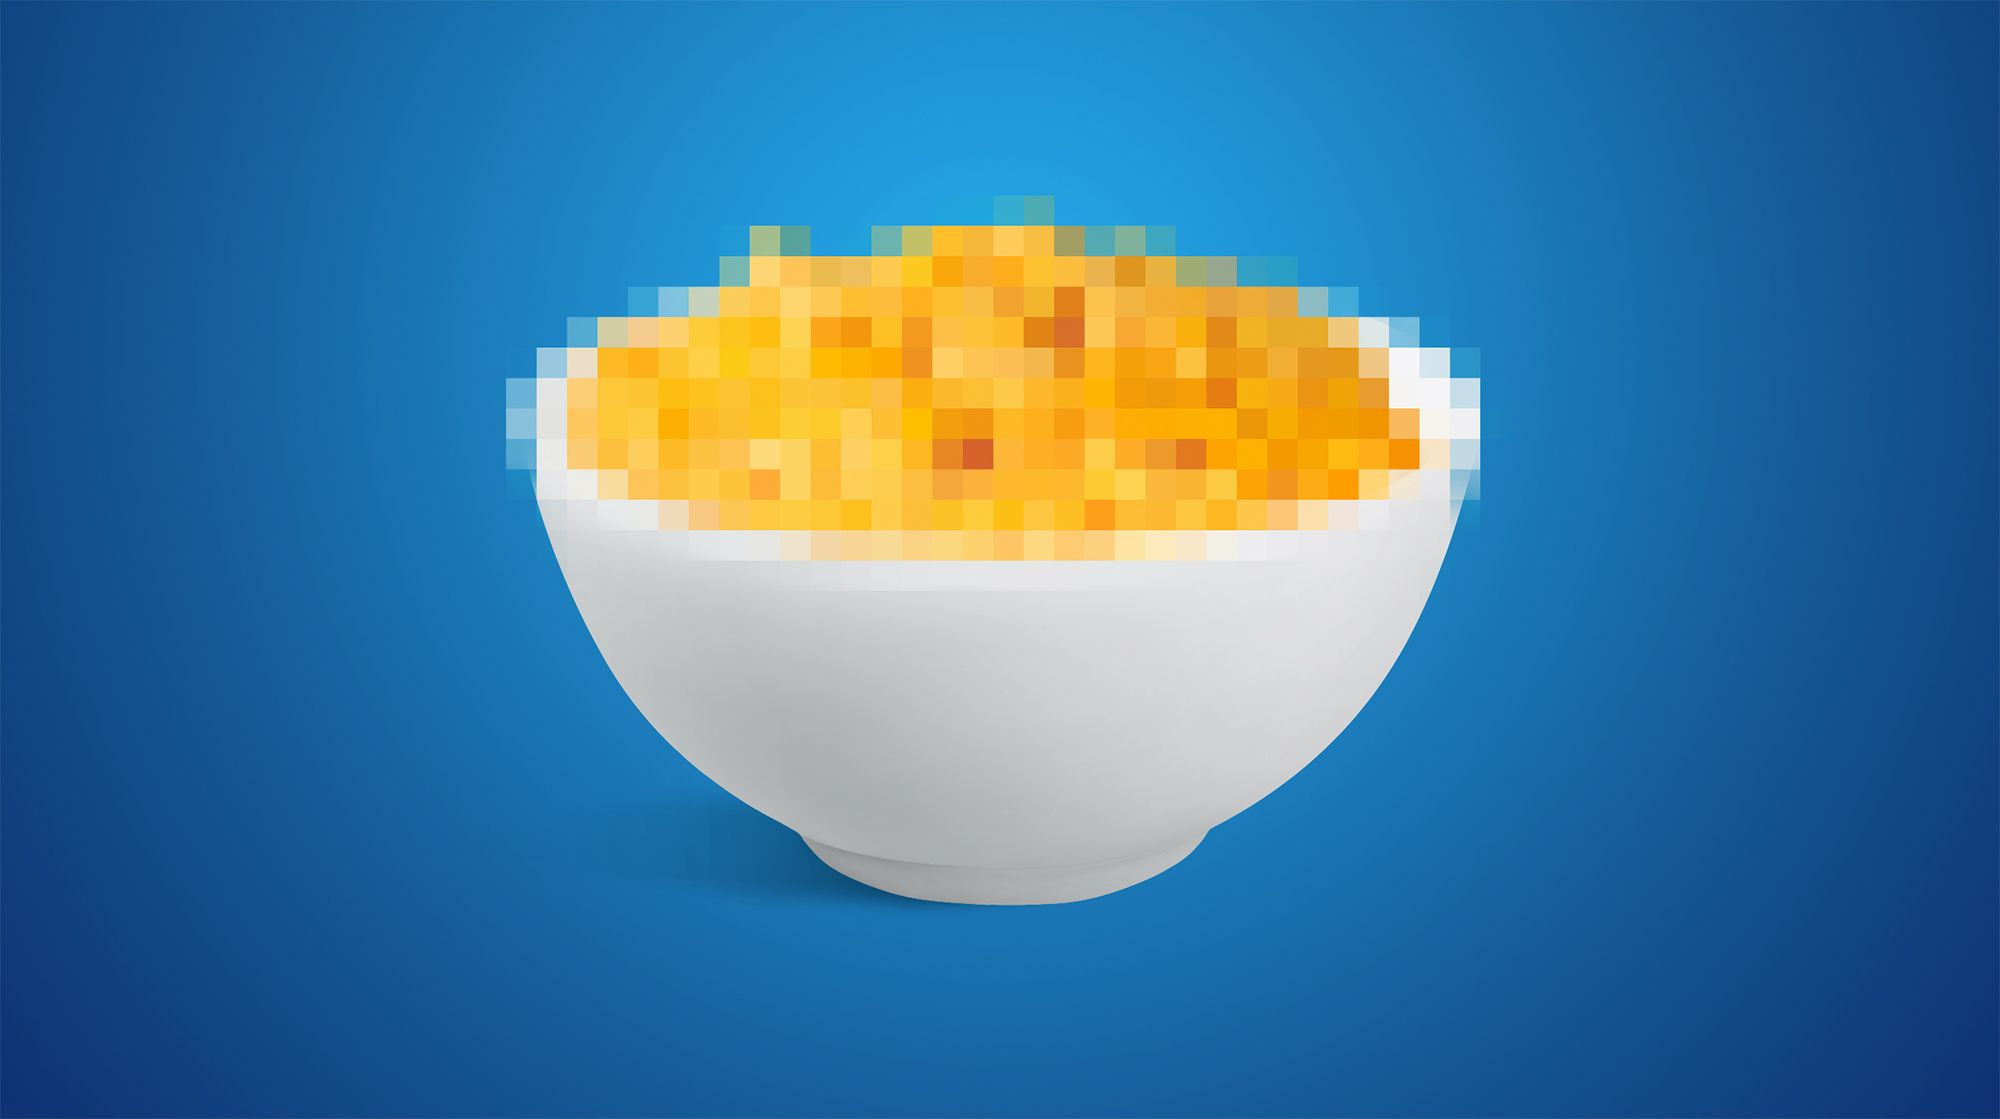 Kraft Mac & Cheese Wants You To Send Noods